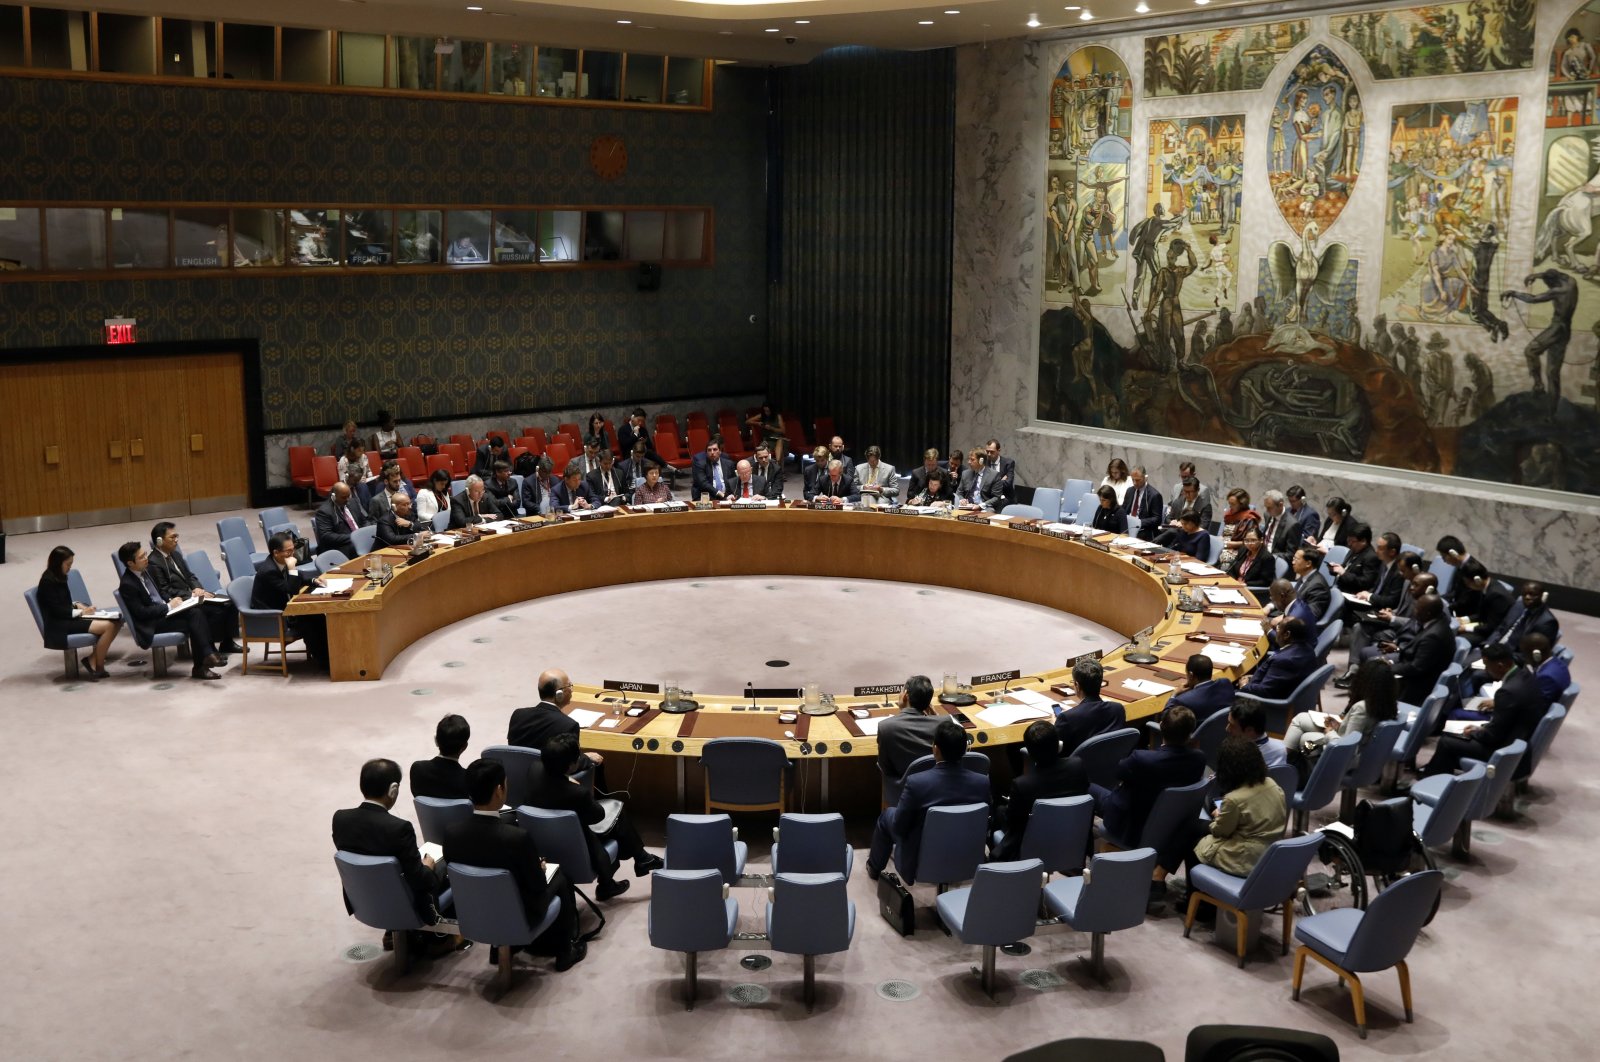 The United Nations Security Council meets at U.N. headquarters, September 17, 2018. (AP Photo)